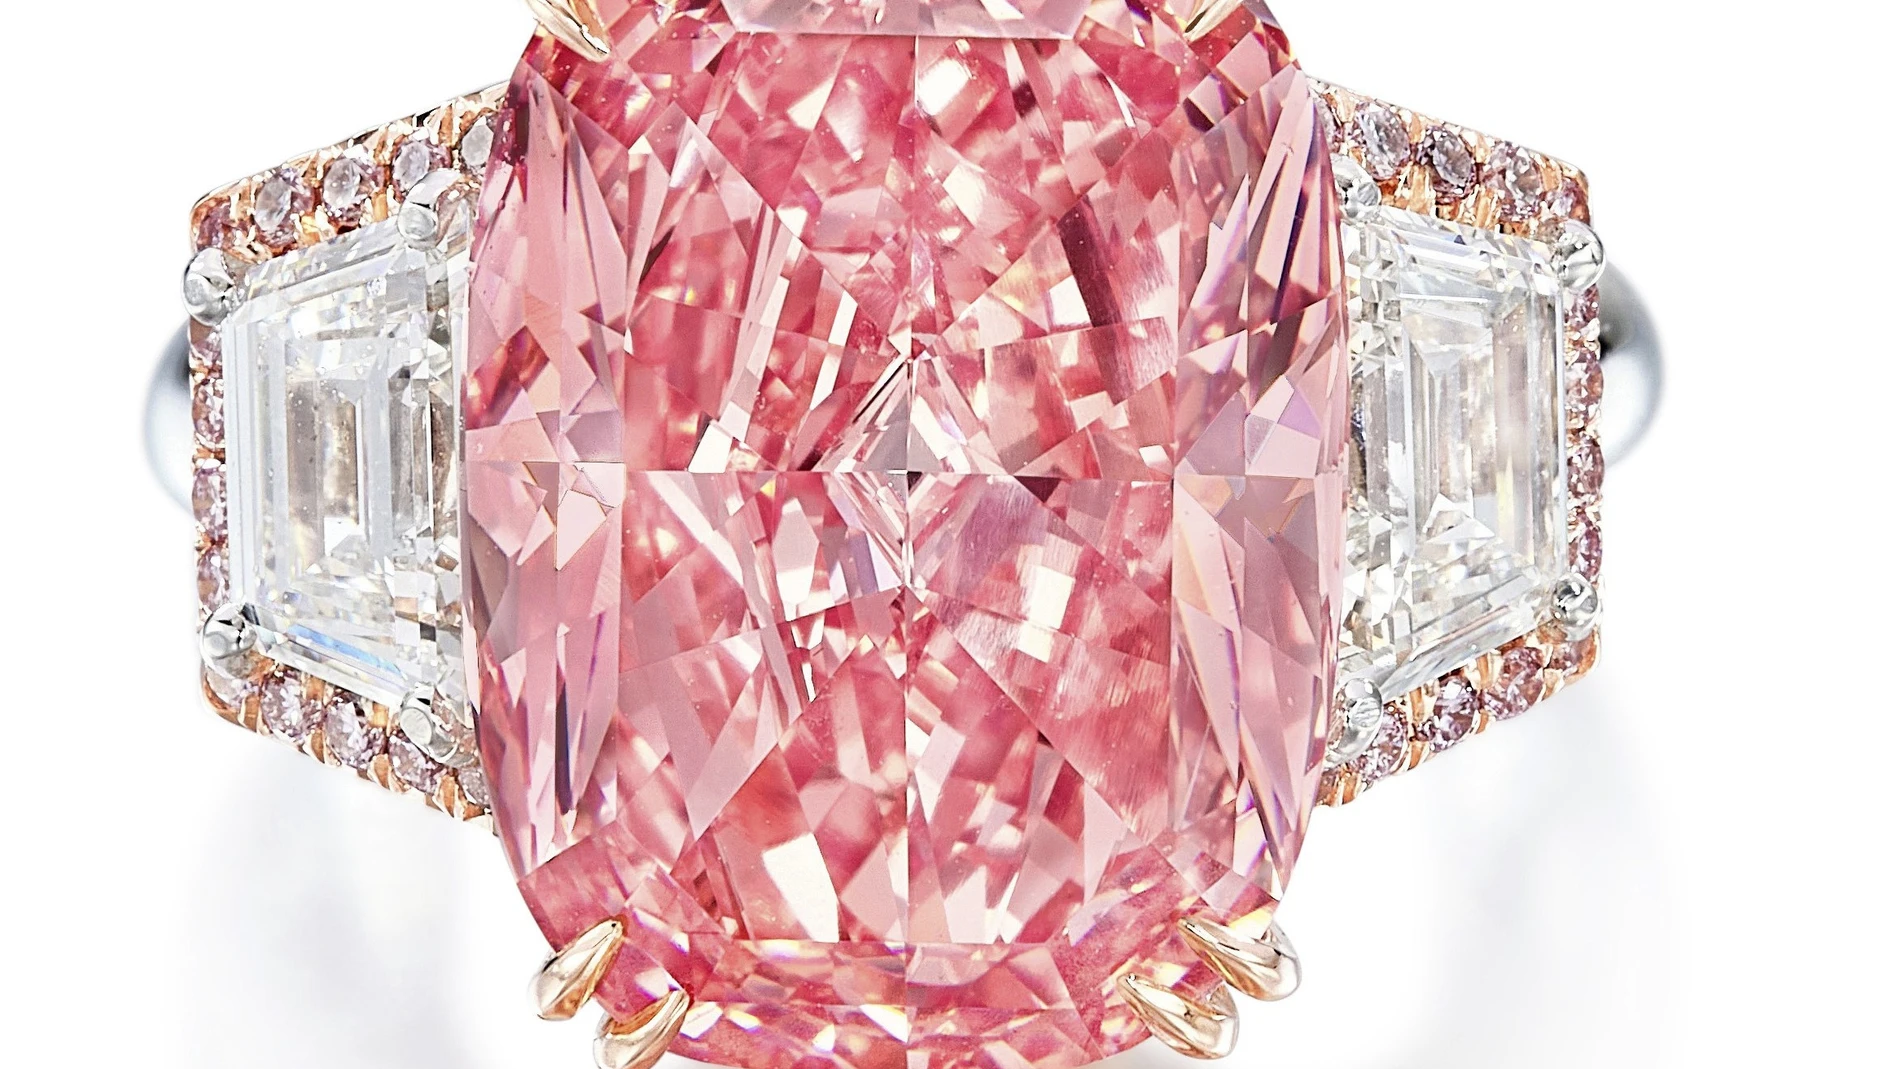 In this undated photo released by Sotheby's, The Williamson Pink Star is seen. The pink diamond was auctioned off at $49.9 million in Hong Kong on Friday, Oct. 7, 2022, setting a world record for the highest price per carat for a diamond sold at auction. (Sotheby's via AP)